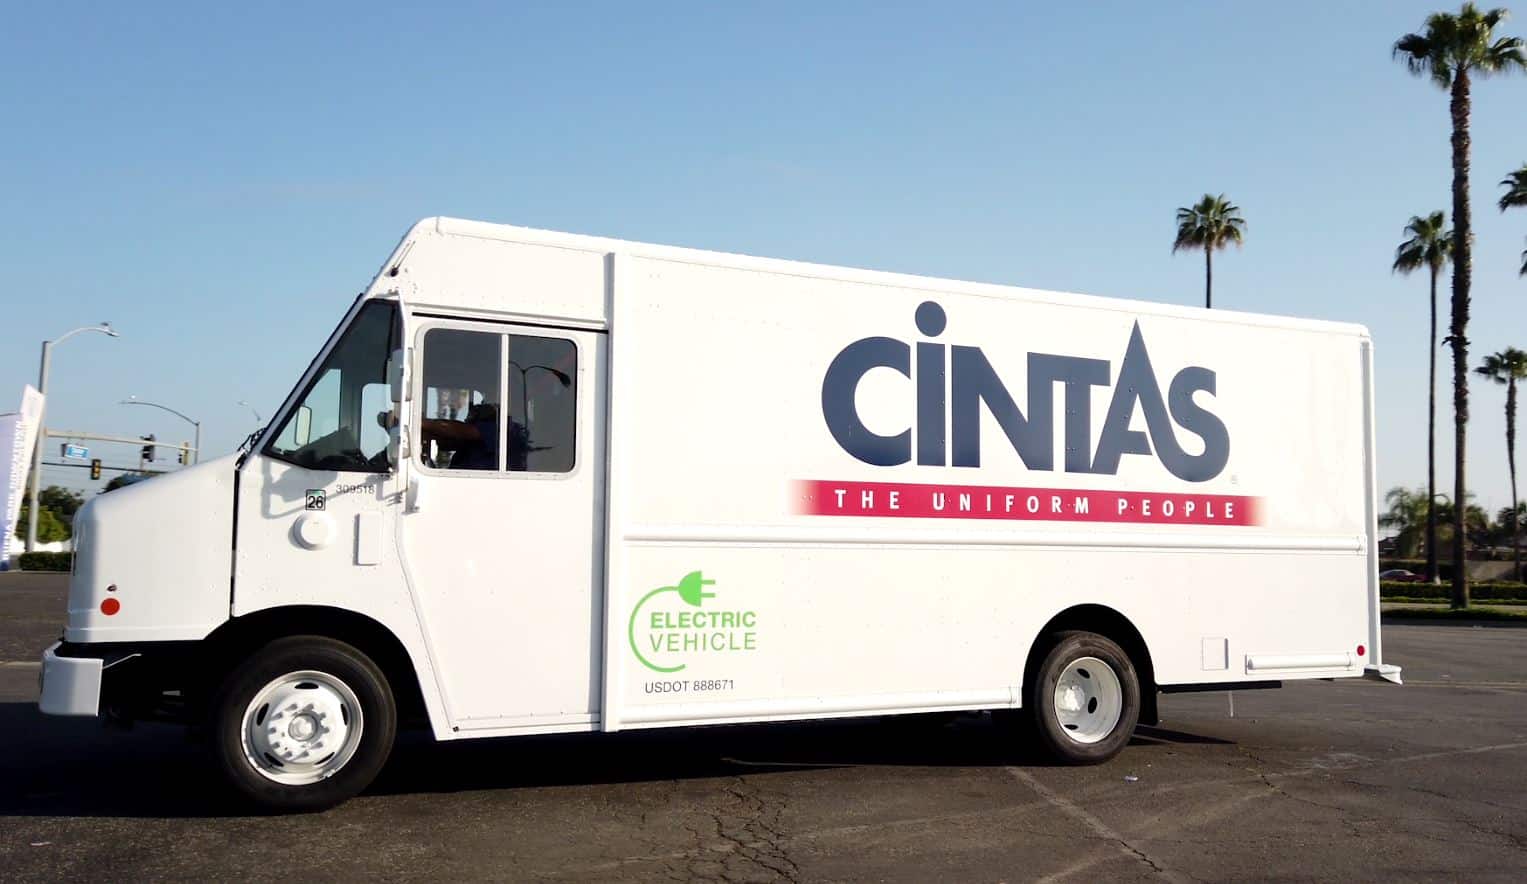 Motiv Power Systems Secures Order for 30 More Electric Delivery Vans from Cintas